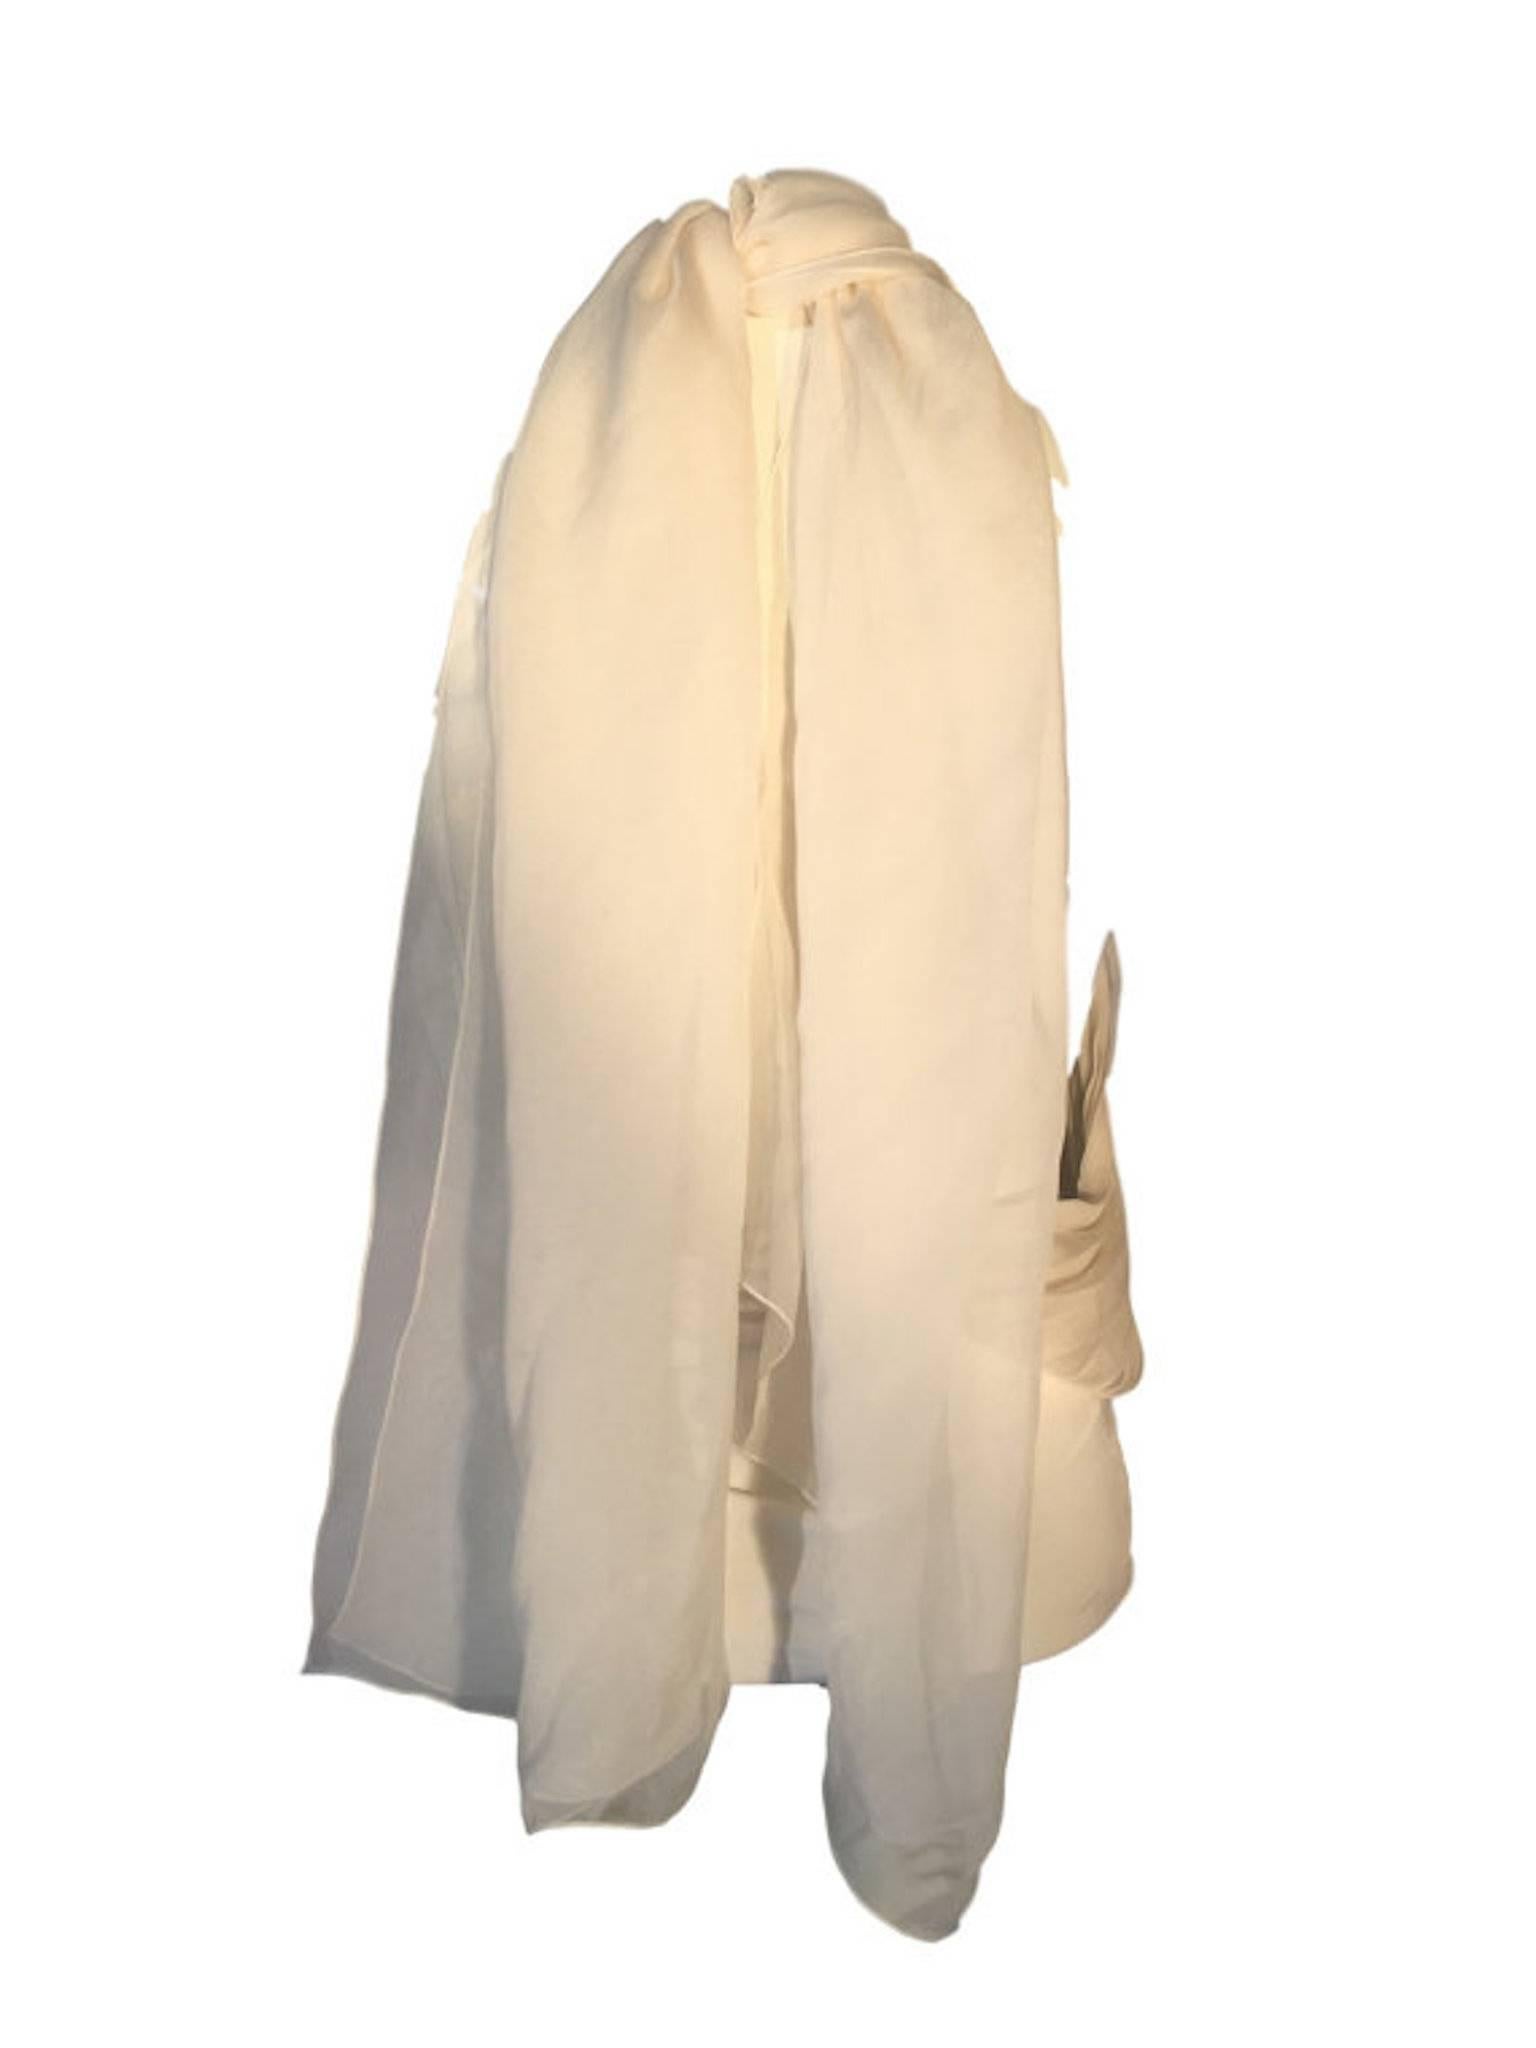 Beautiful Gianfranco Ferre Cream Chiffon Top. Made from silk and has pleated detail. With long neck sash that ties at the back of the neck. Elasticated waist section.

Labelled a 38 Size UK 8 measuring 13 inches across waist band and 28 inches